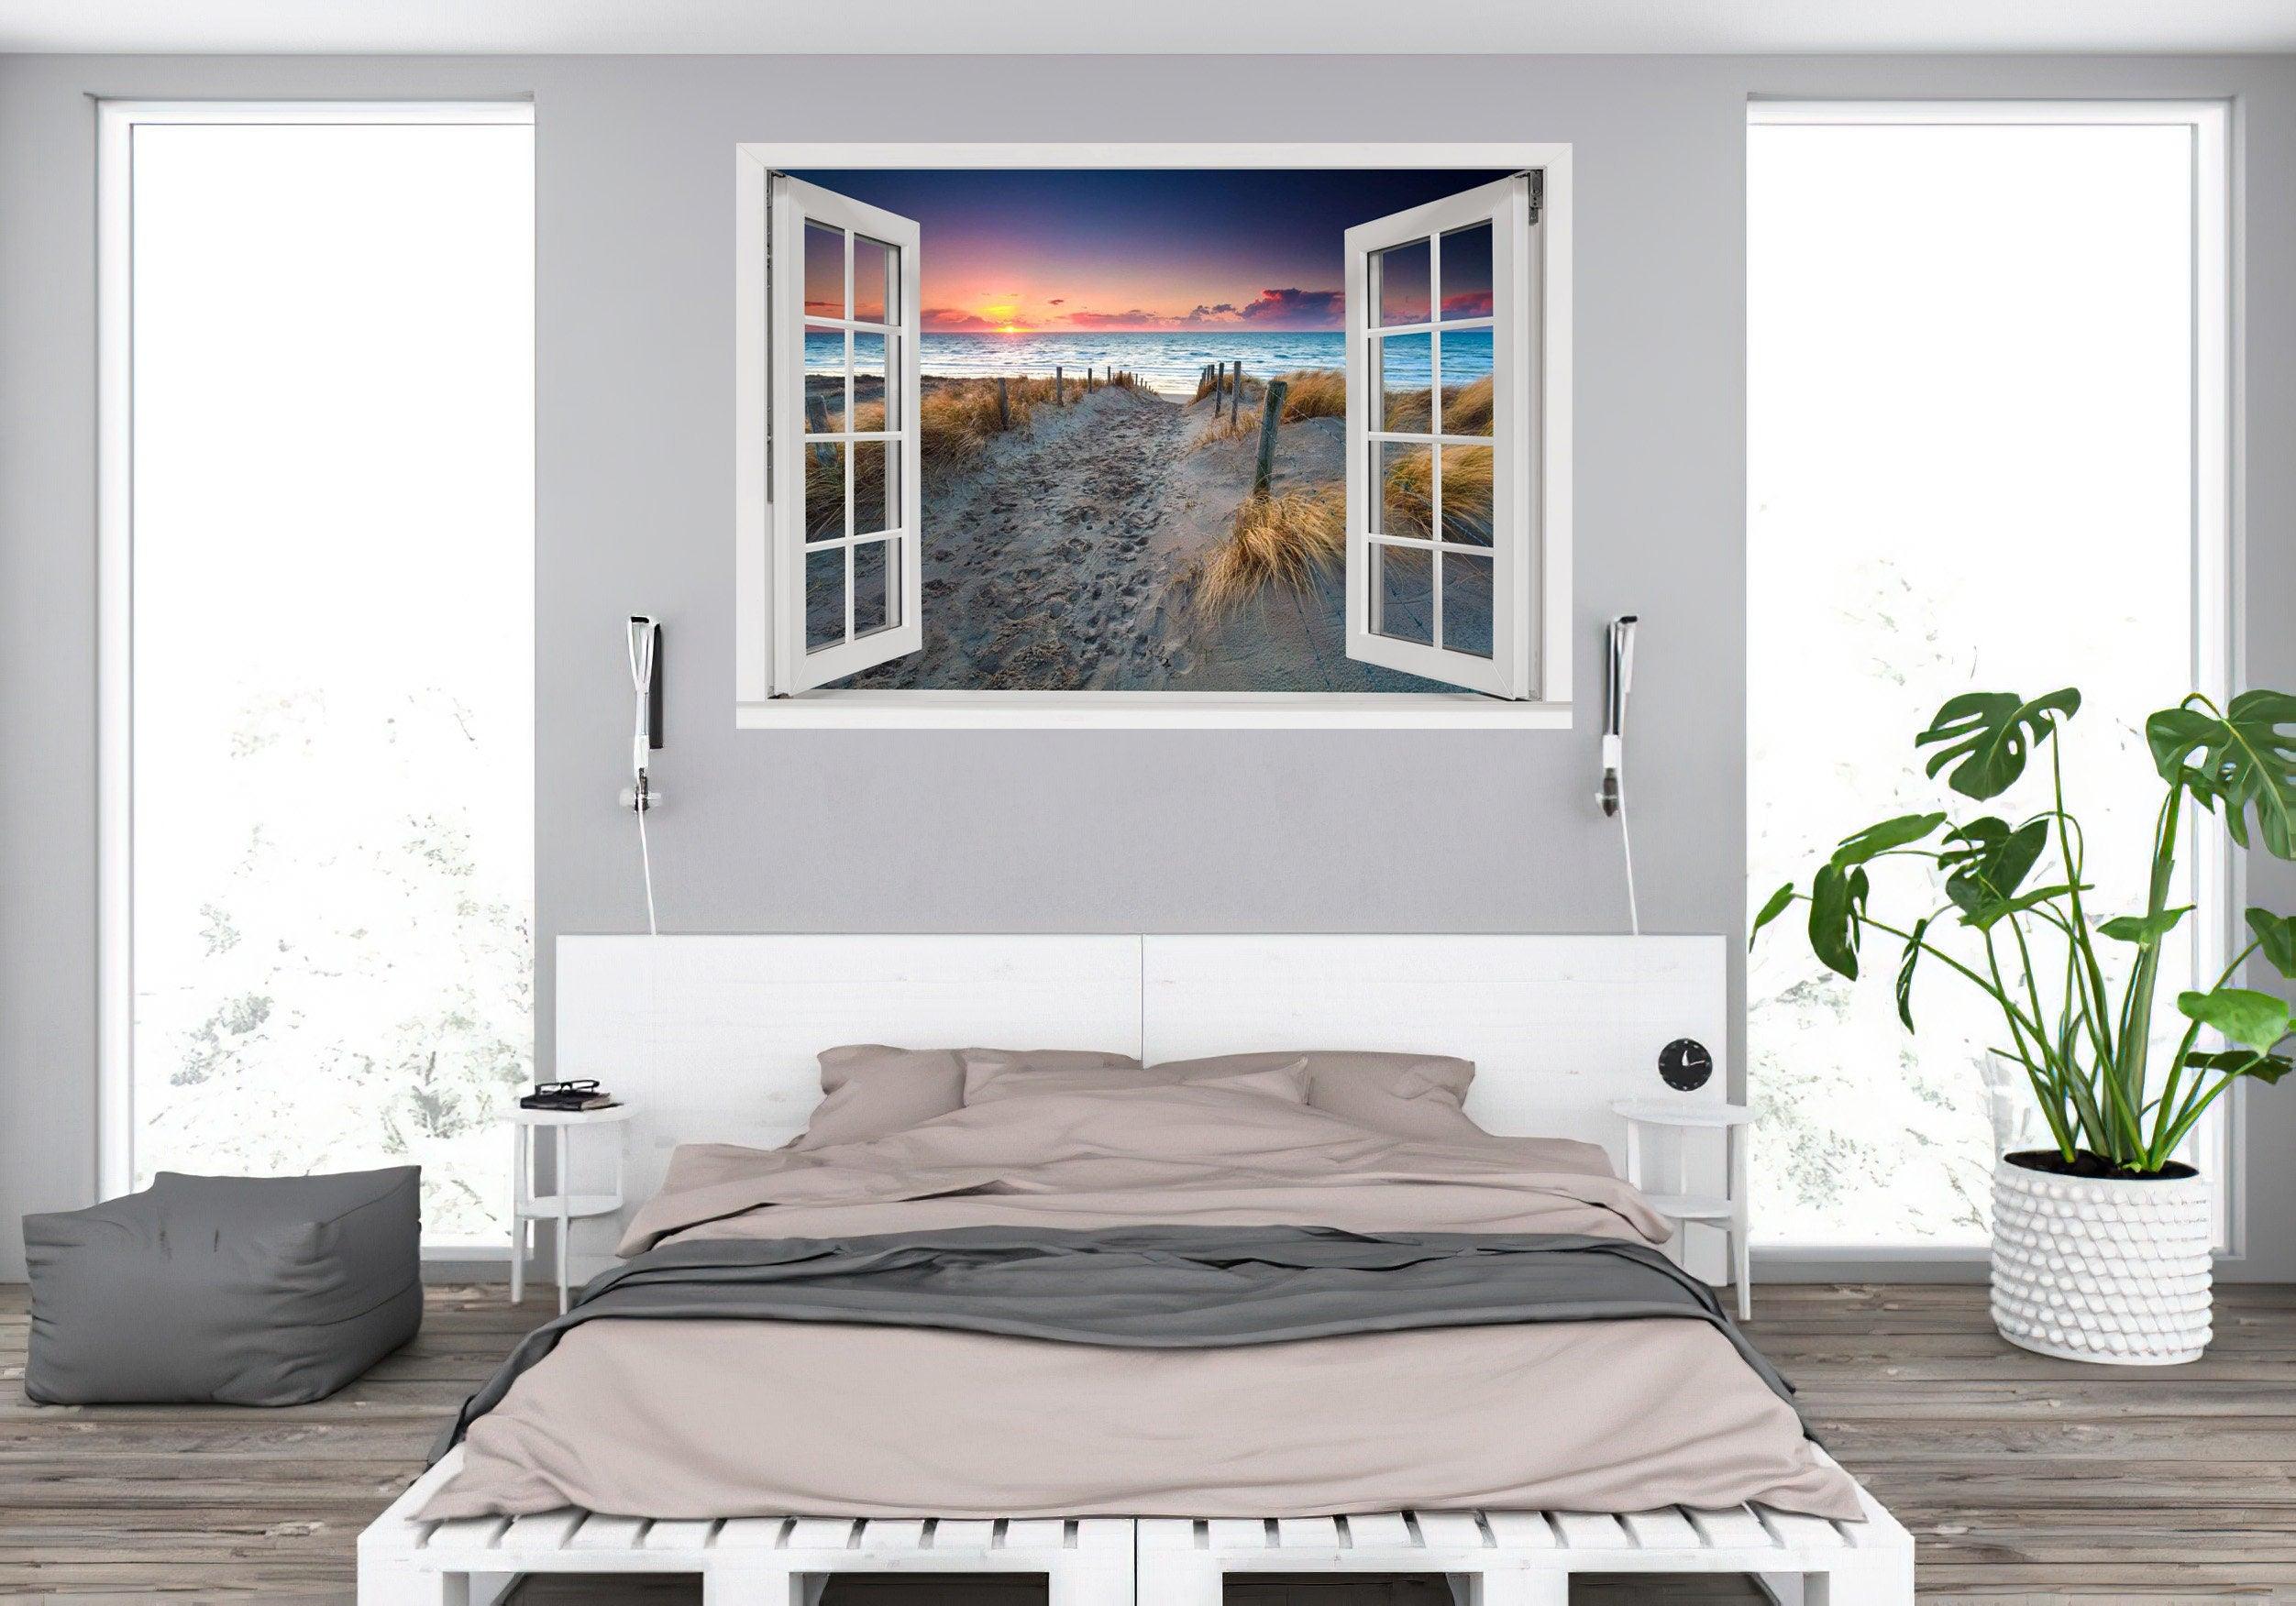 Window Scape Tropical #3 Window Decal Sticker Mural Beach Removable Fabric Window Frame Office Bedroom 3D